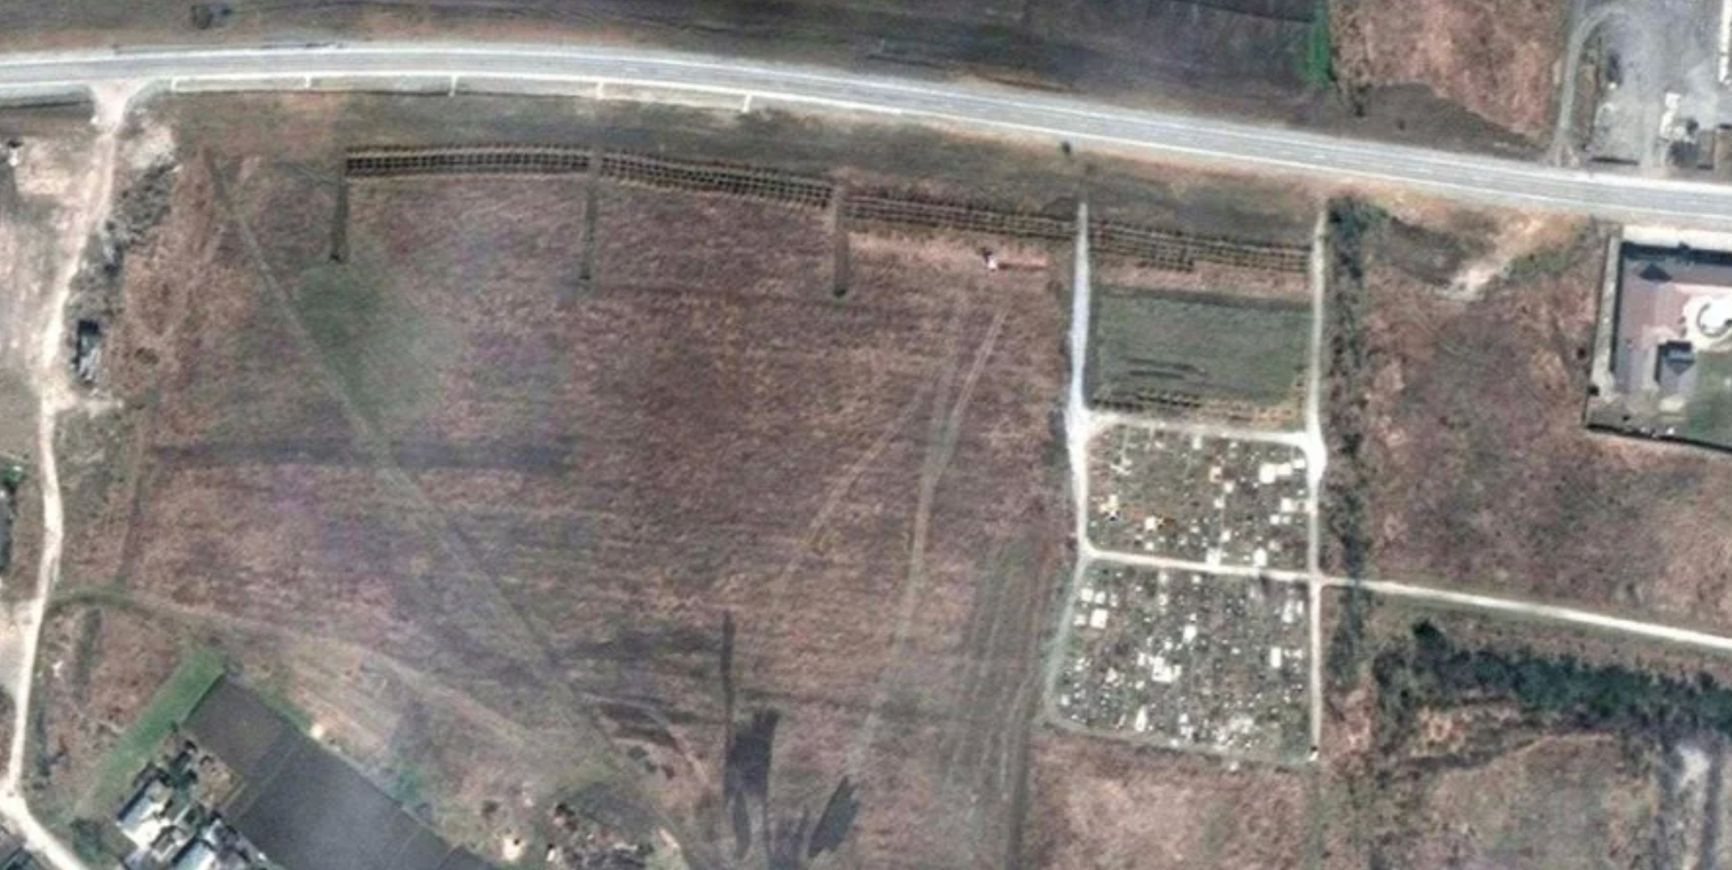 Mass graves in Mangush. Photo by Maxar Technologies